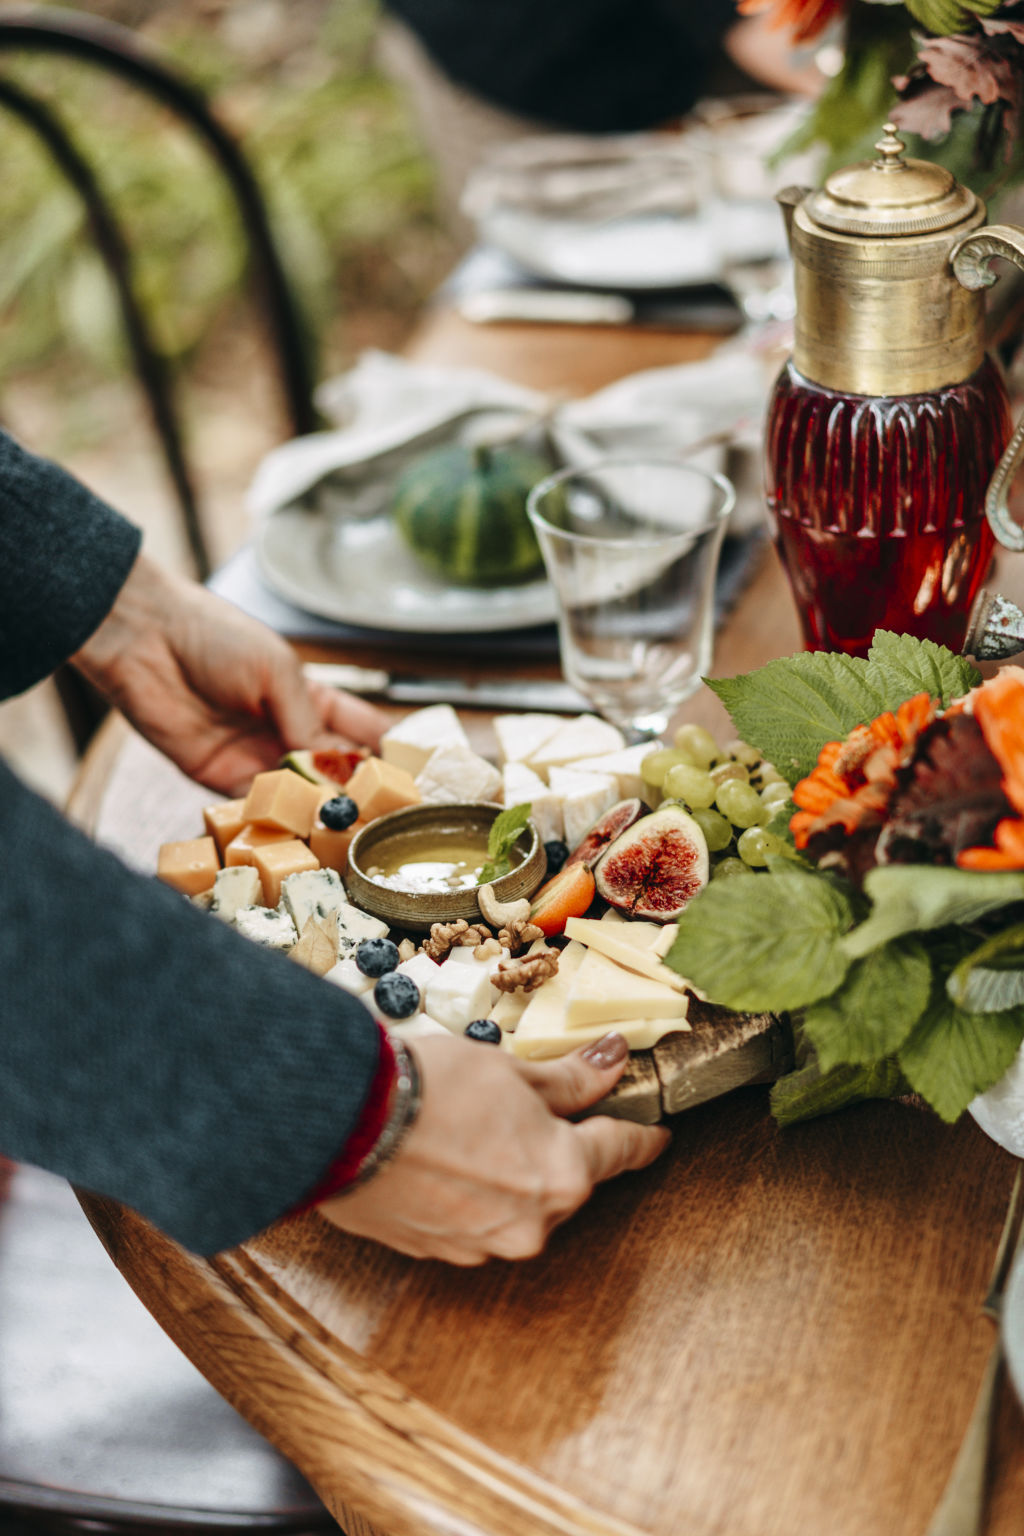 Ninety per cent of respondants say they feel that sharing a meal is an important way of connecting with their wider family. Photo: Stocksy